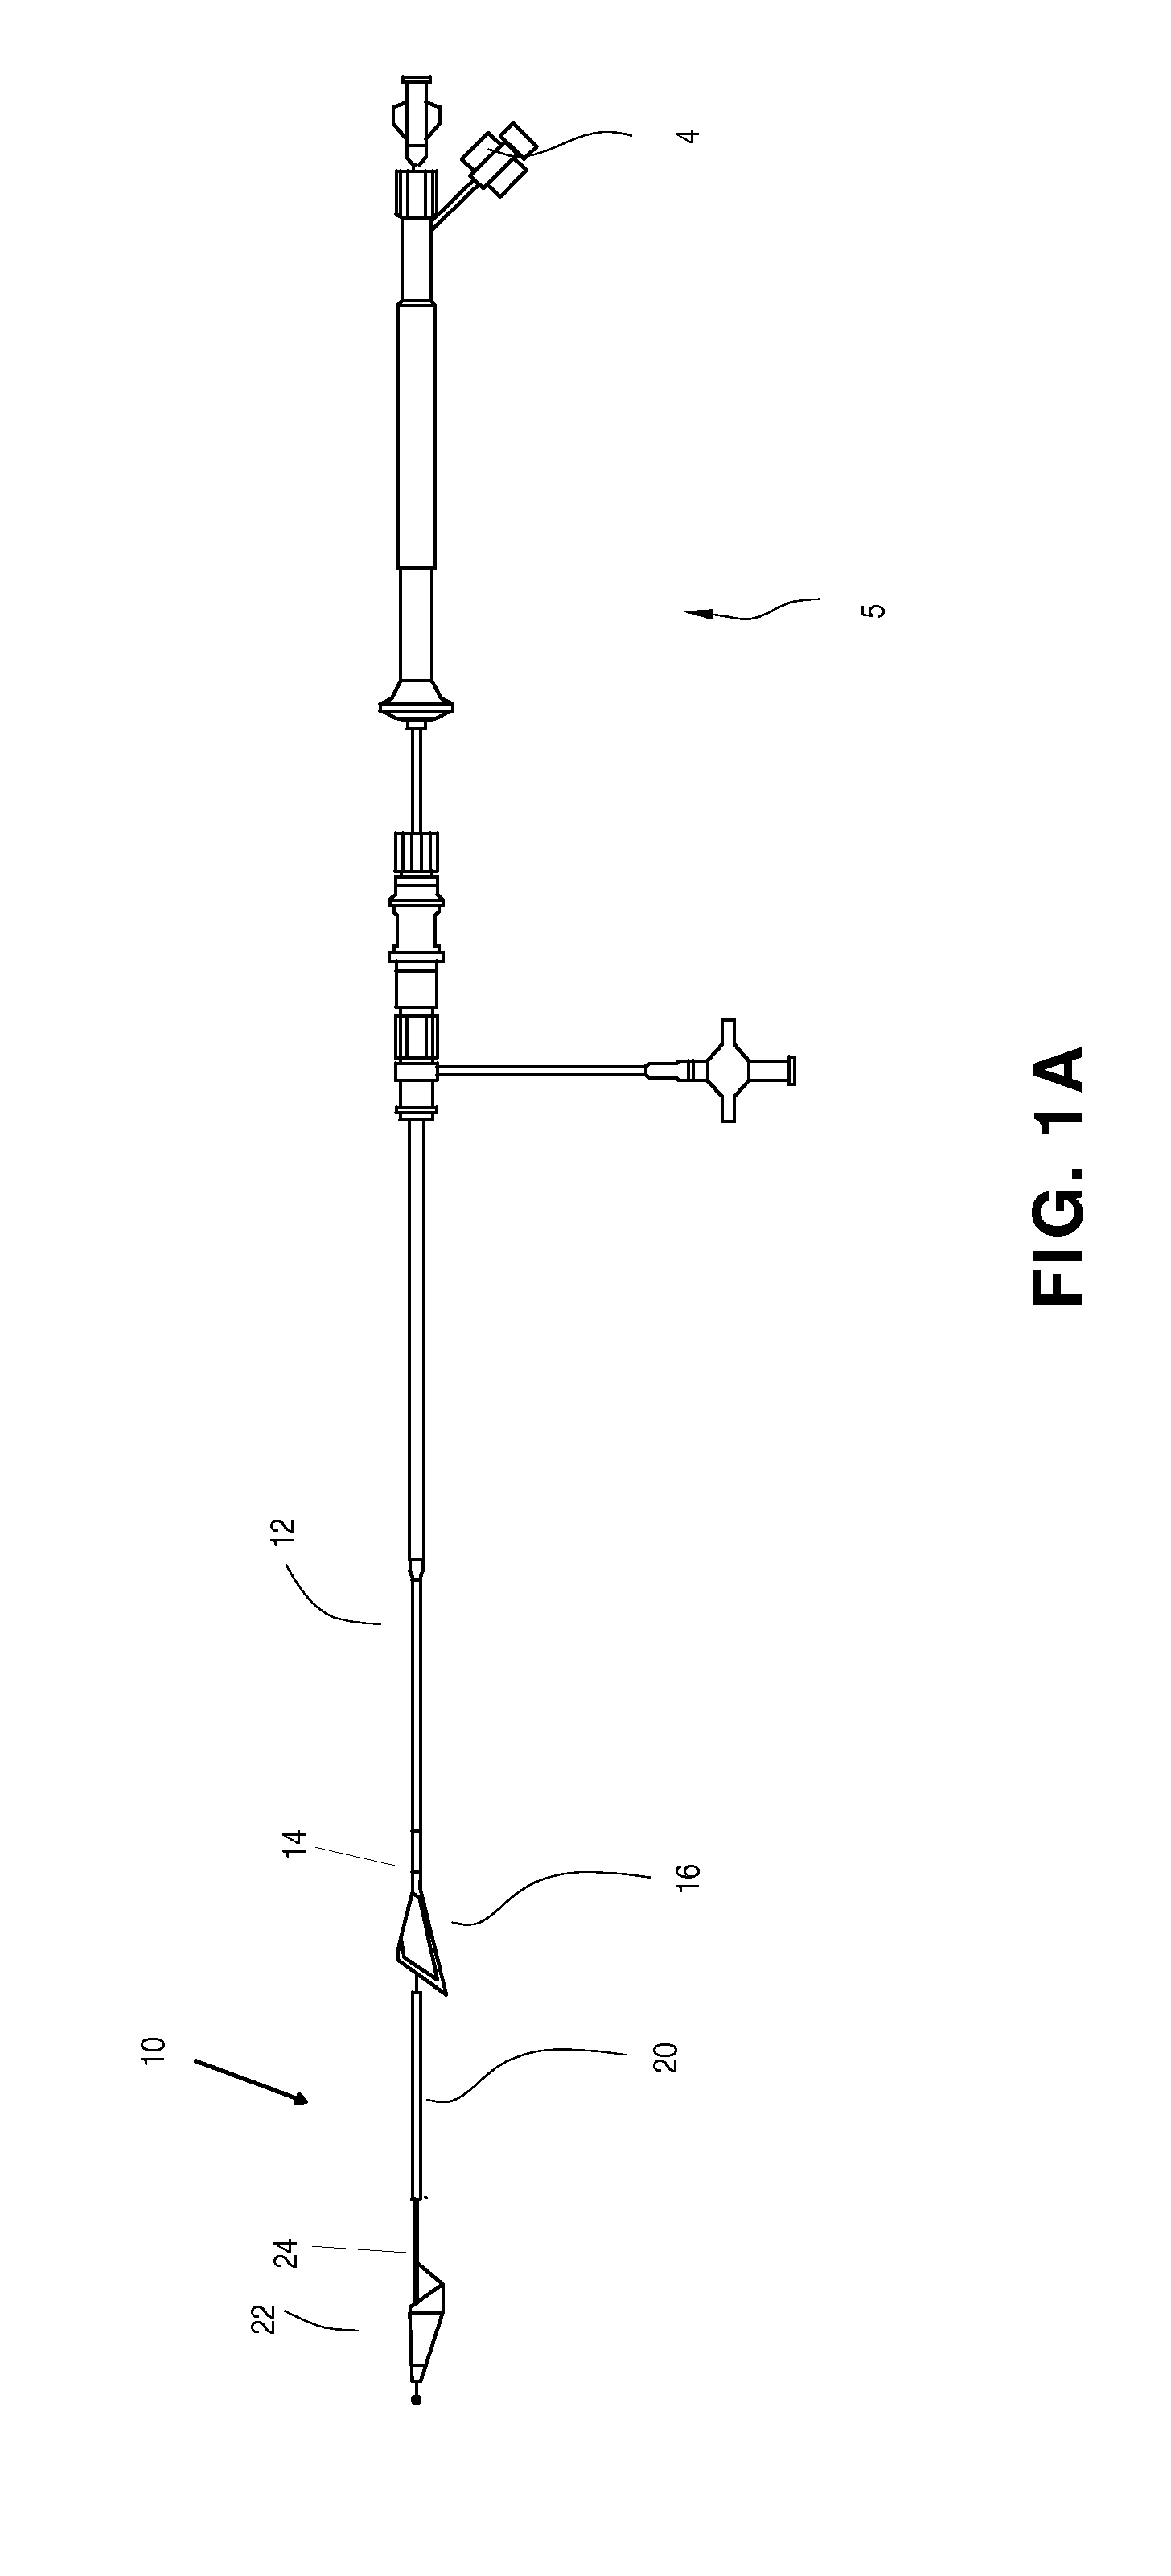 Method of Isolating the Cerebral Circulation During a Cardiac Procedure